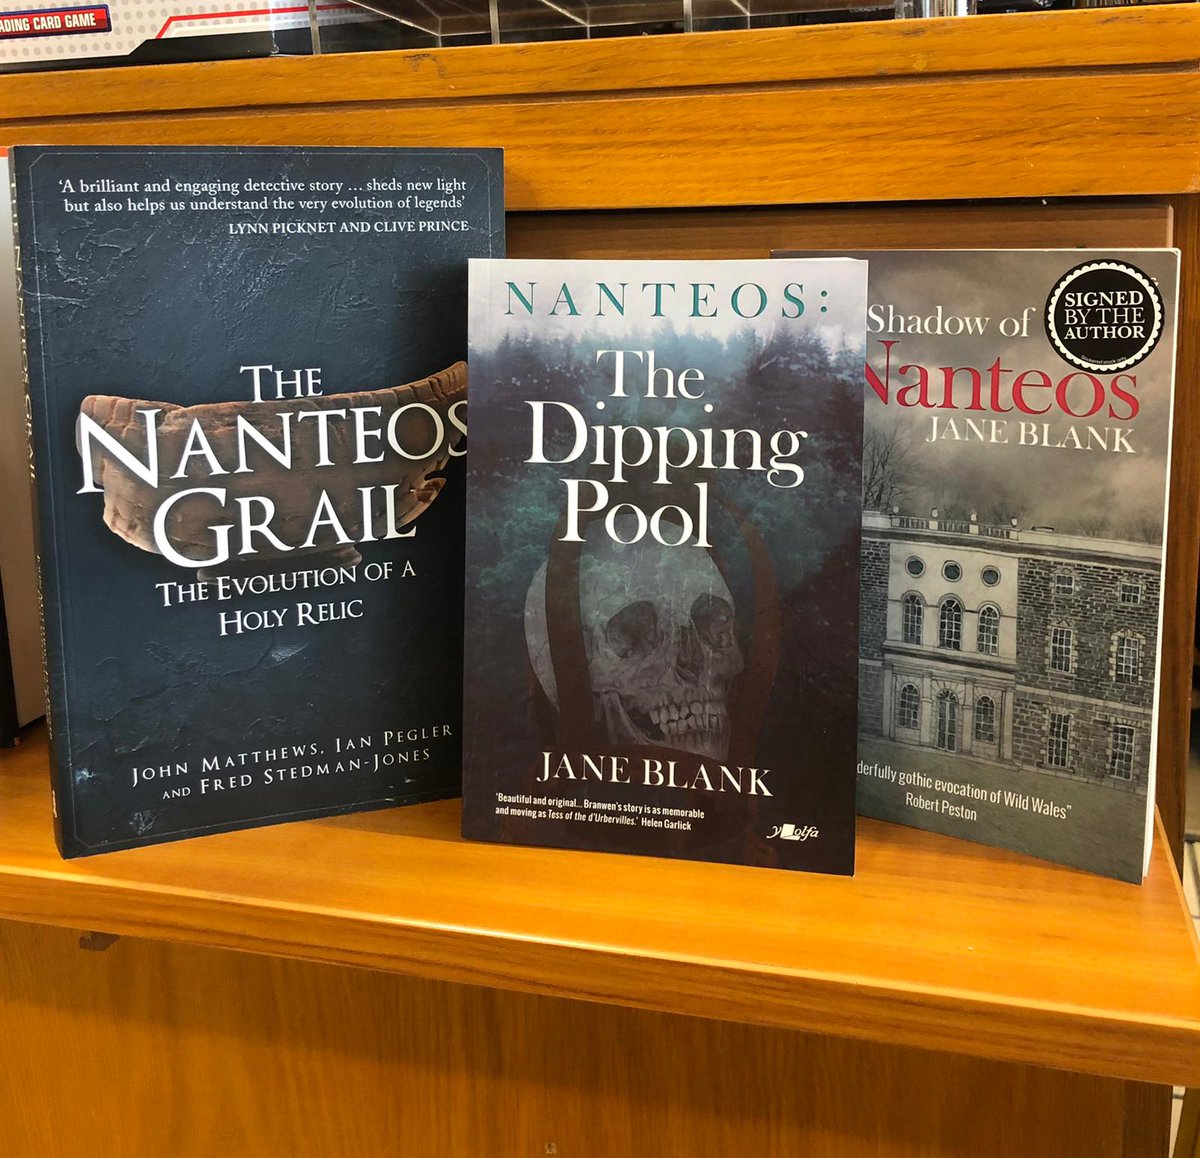 Join us on Friday 19th of May! Where we have @SJaneBlank and Ian Pegler in store to discuss their books that revolve around the infamous, spooky Welsh Mansion. Tickets are still available, get yours now to avoid disappointment!